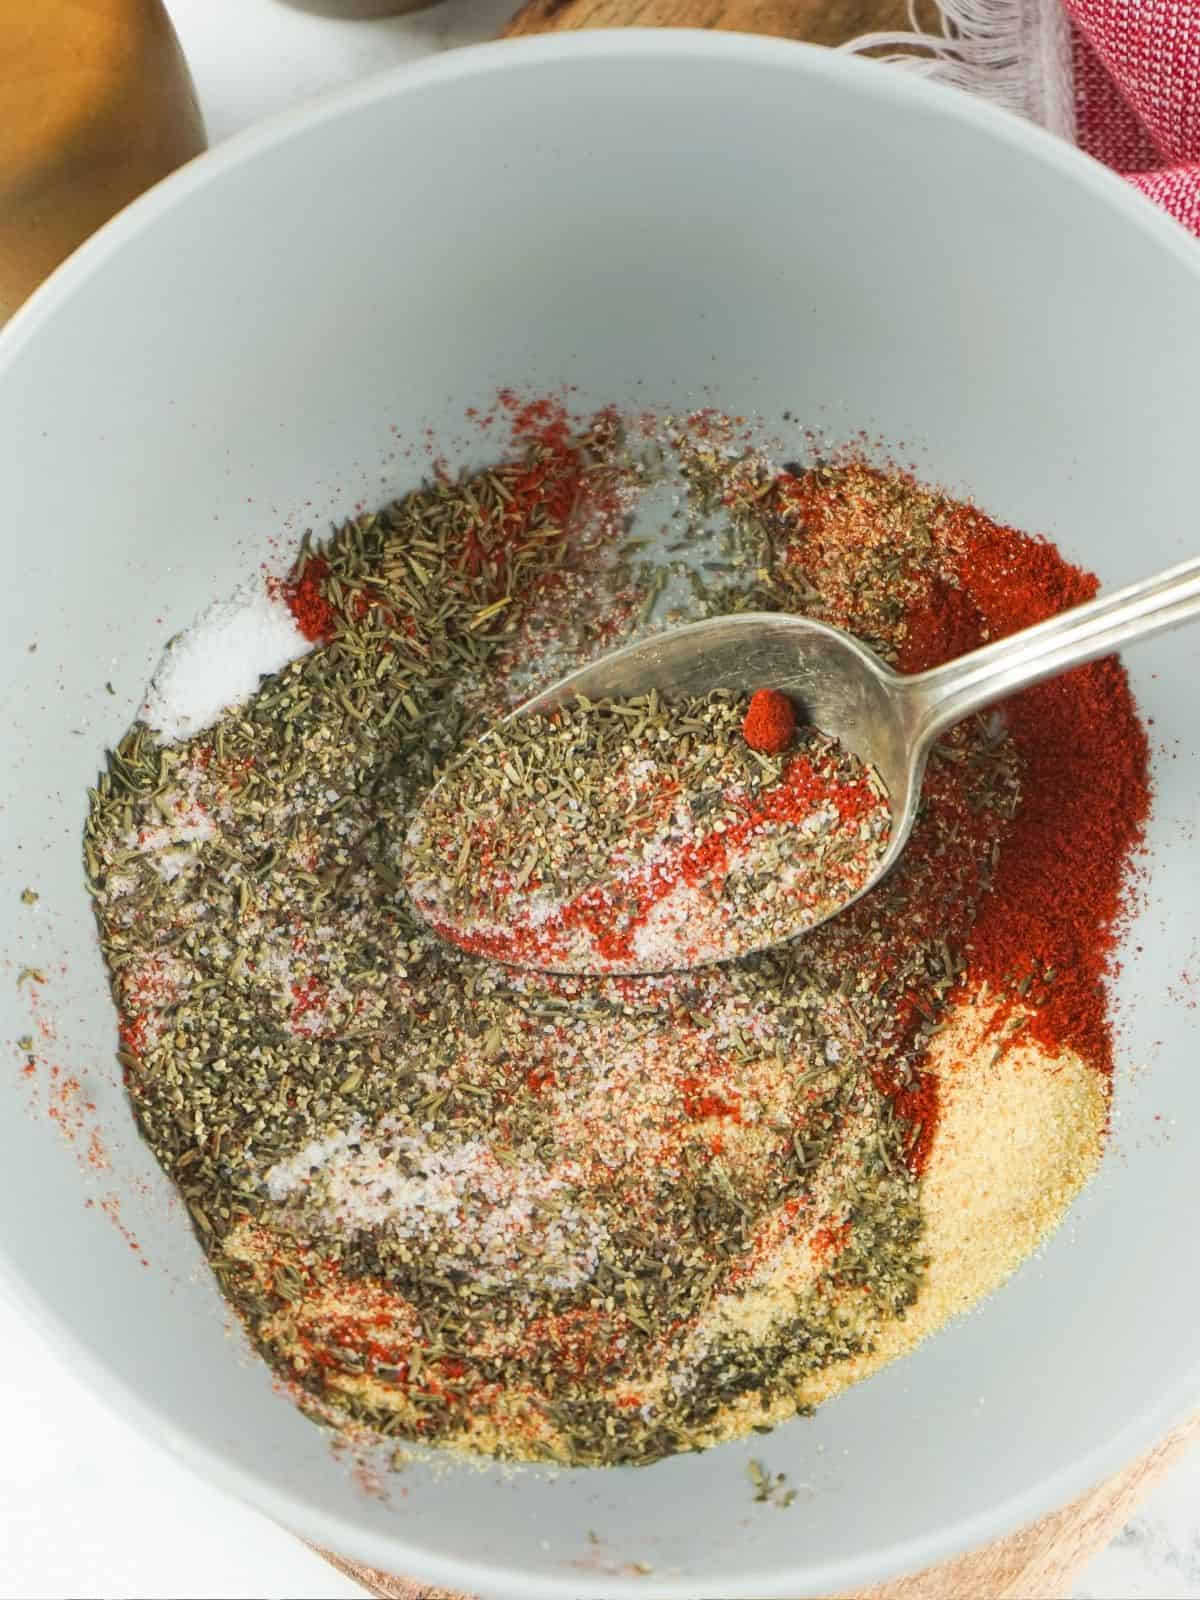 steak seasoning mix combined together in white bowl with spoon.